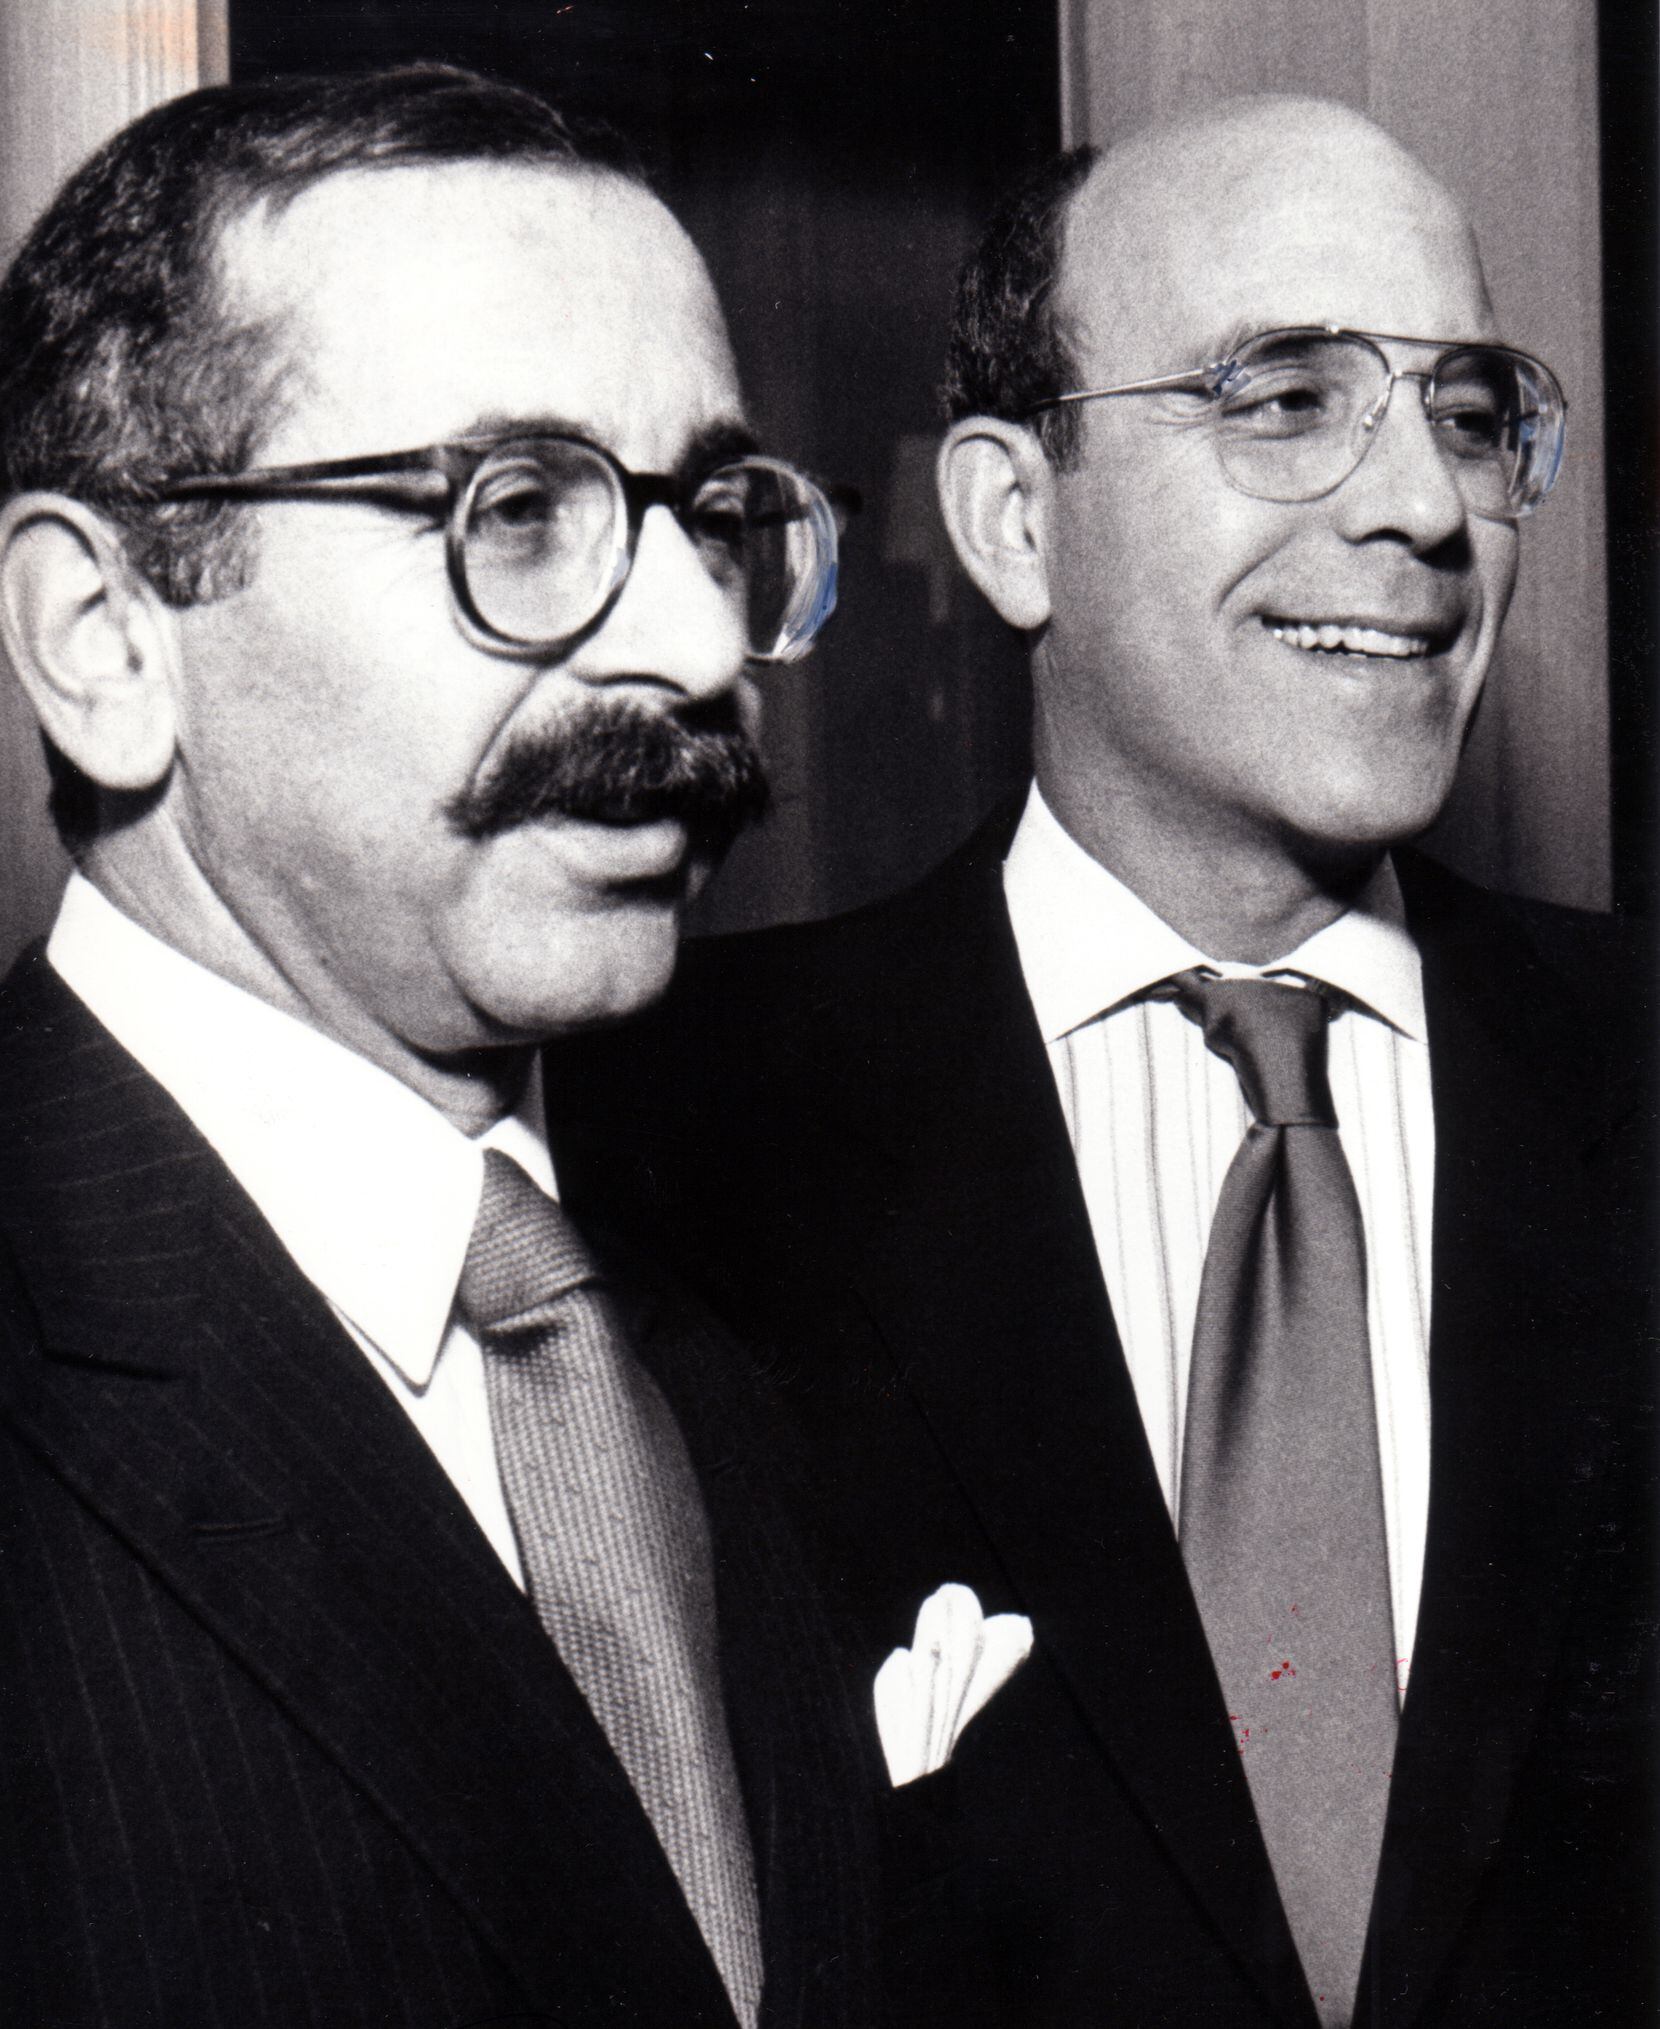 Edward Safdie (left) and Richard Marcus are seen in this picture on October 21, 1984.